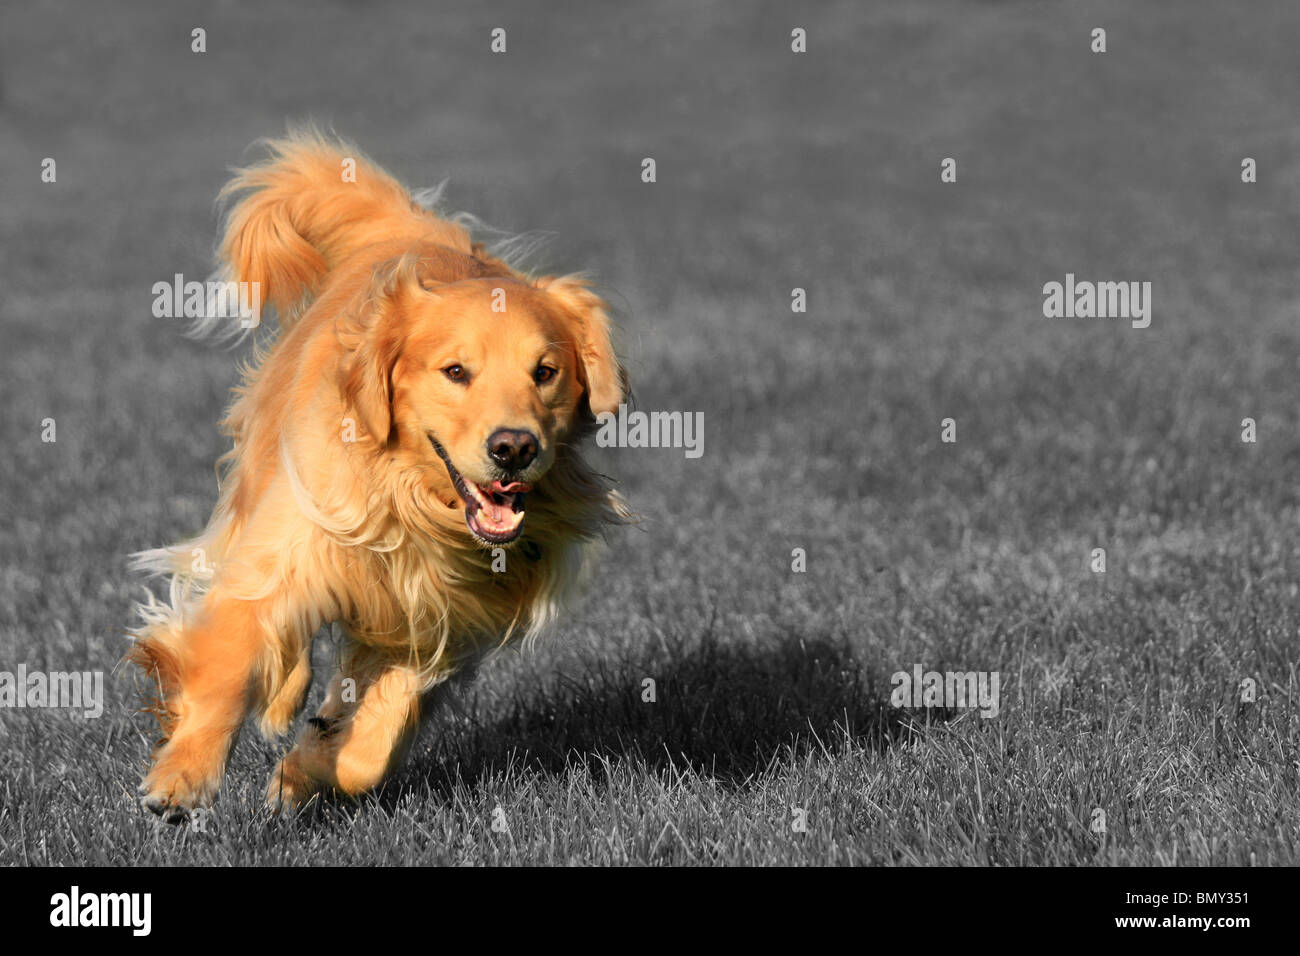 playful dog on black andd white background of grass Stock Photo